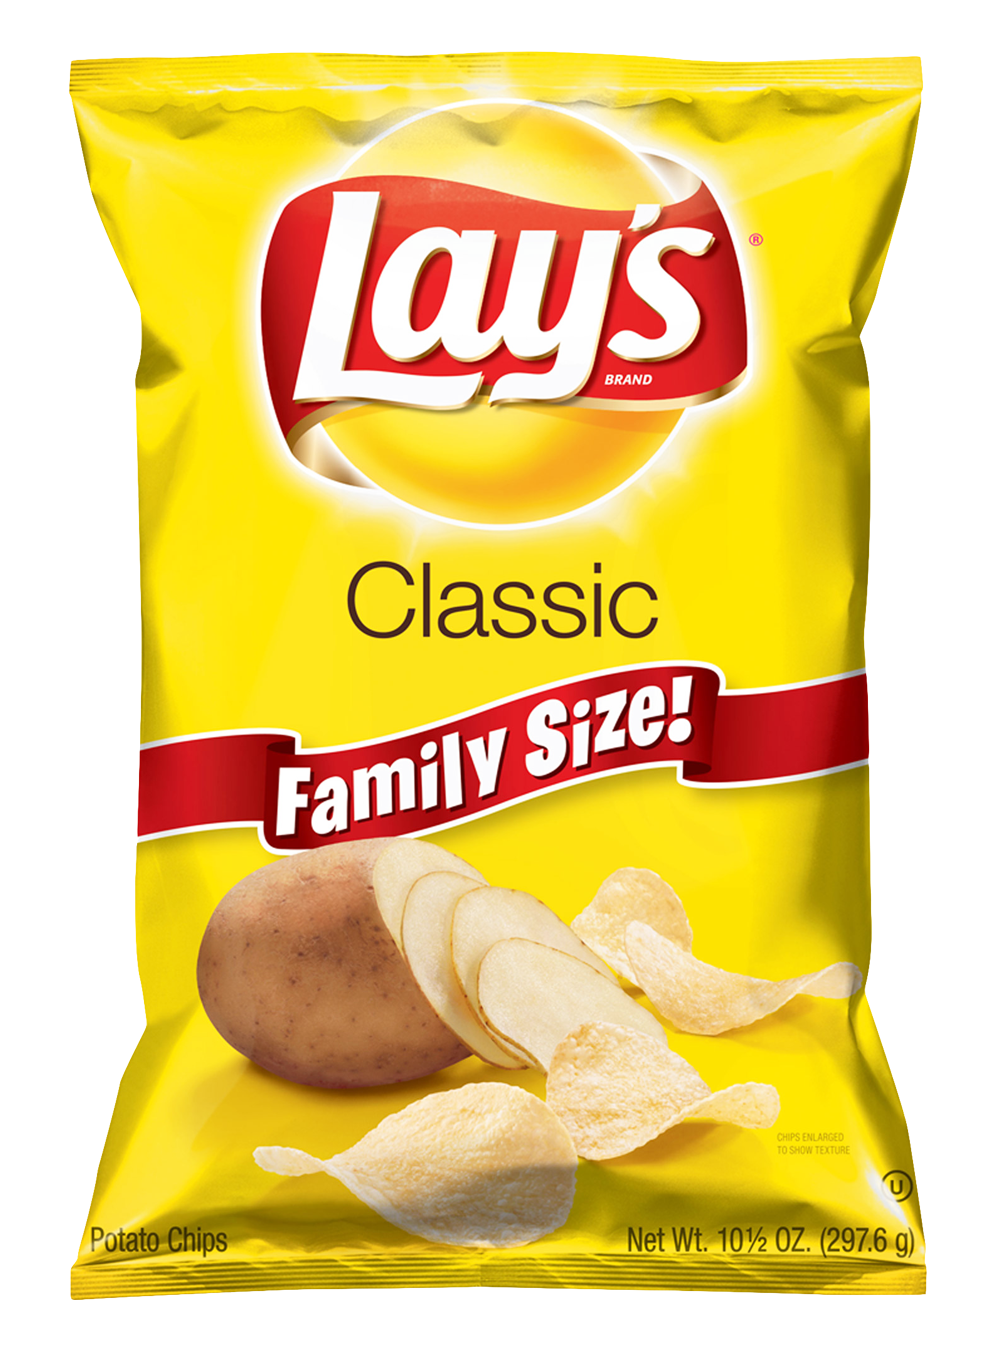 Bag Of Chips Png